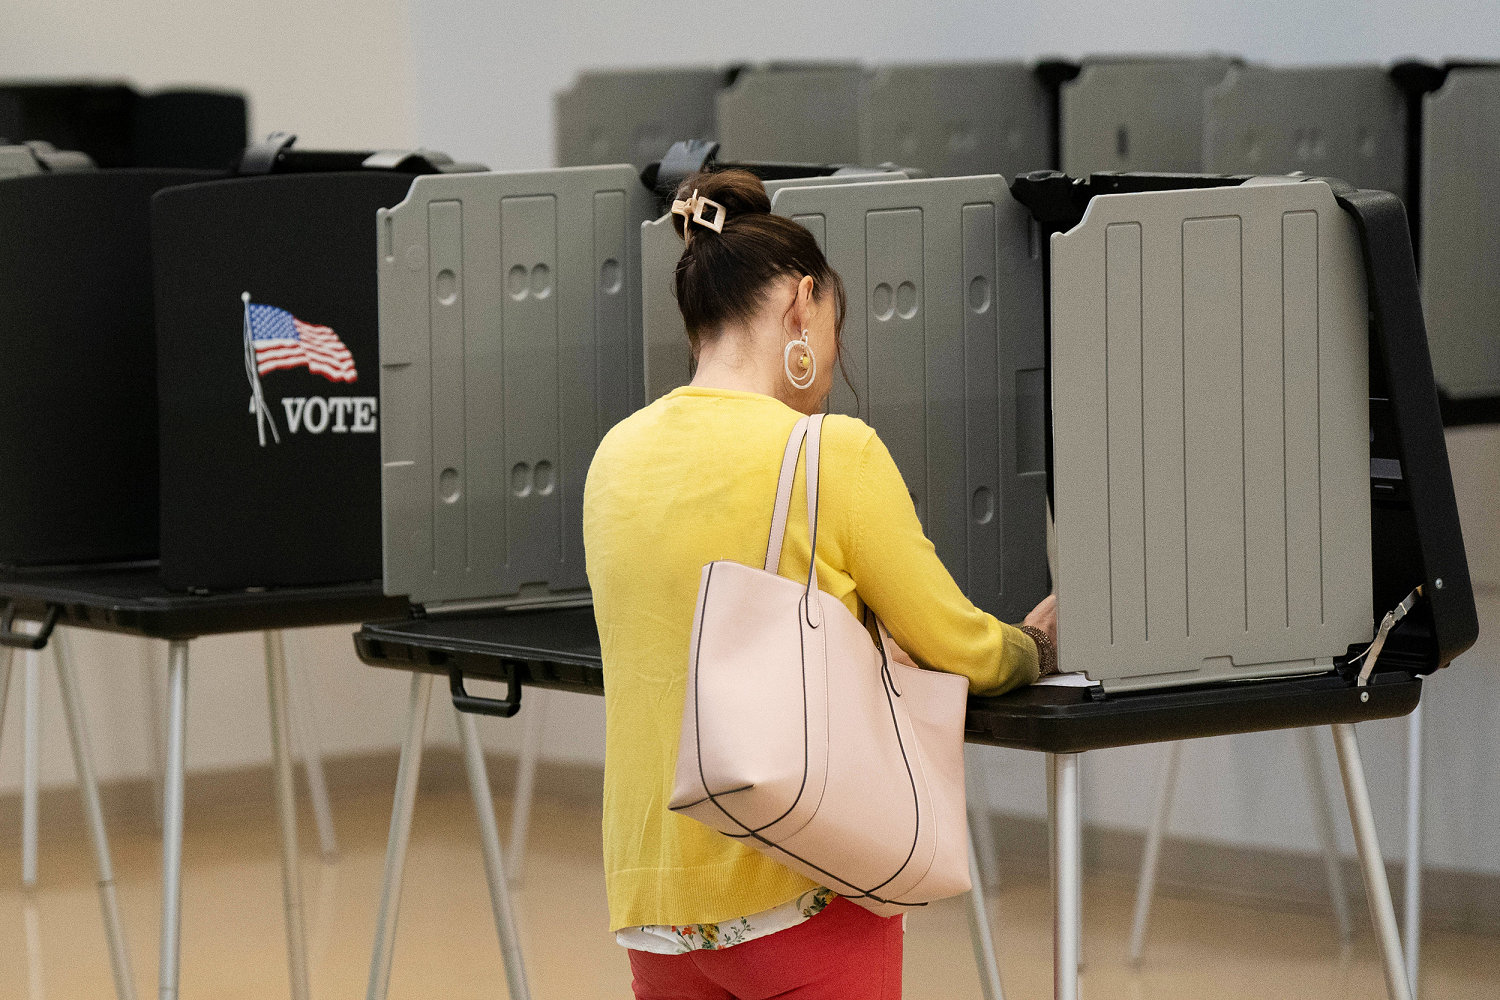 Conservative activists find errors in software they hoped would root out voter fraud